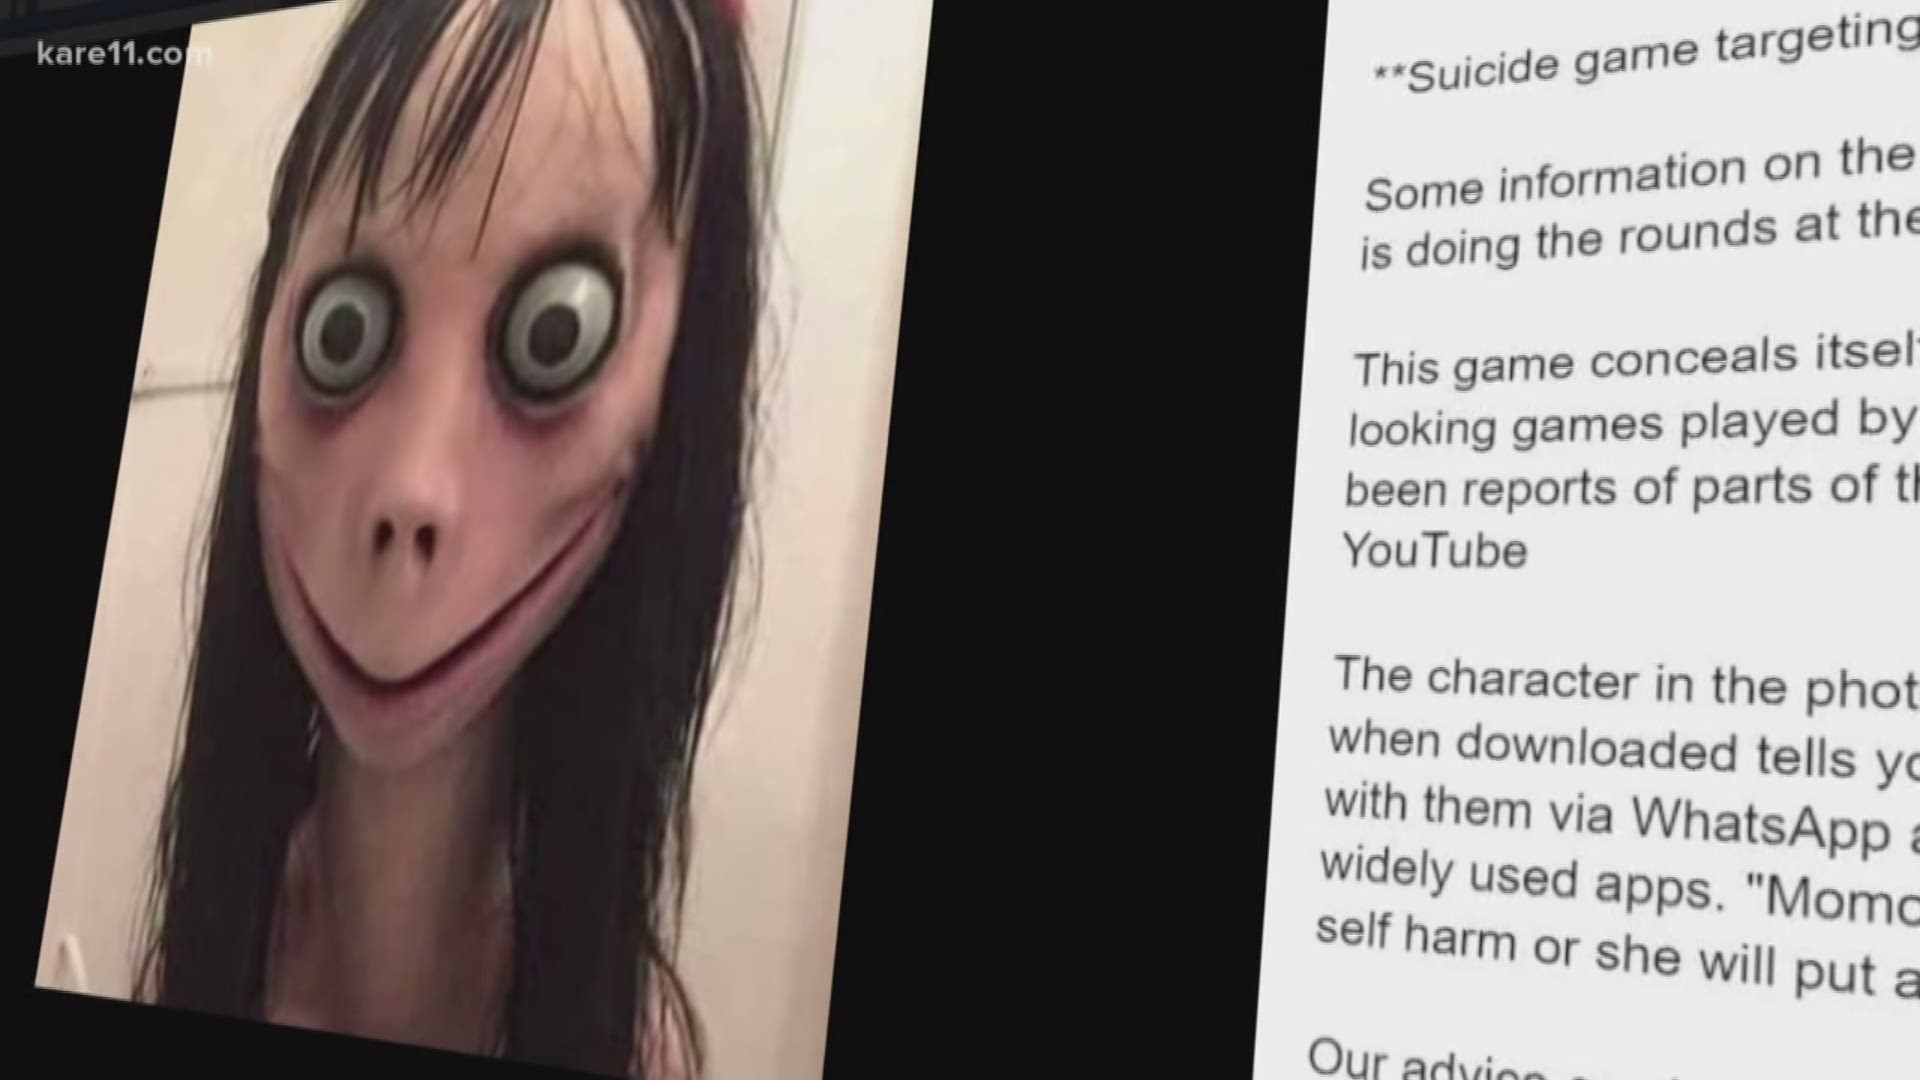 The internet is at it again. The "Momo challenge" is making fresh rounds, thanks to posts being shared on social media. But attempts to warn other parents by sharing posts like these - may actually do more harm than good.